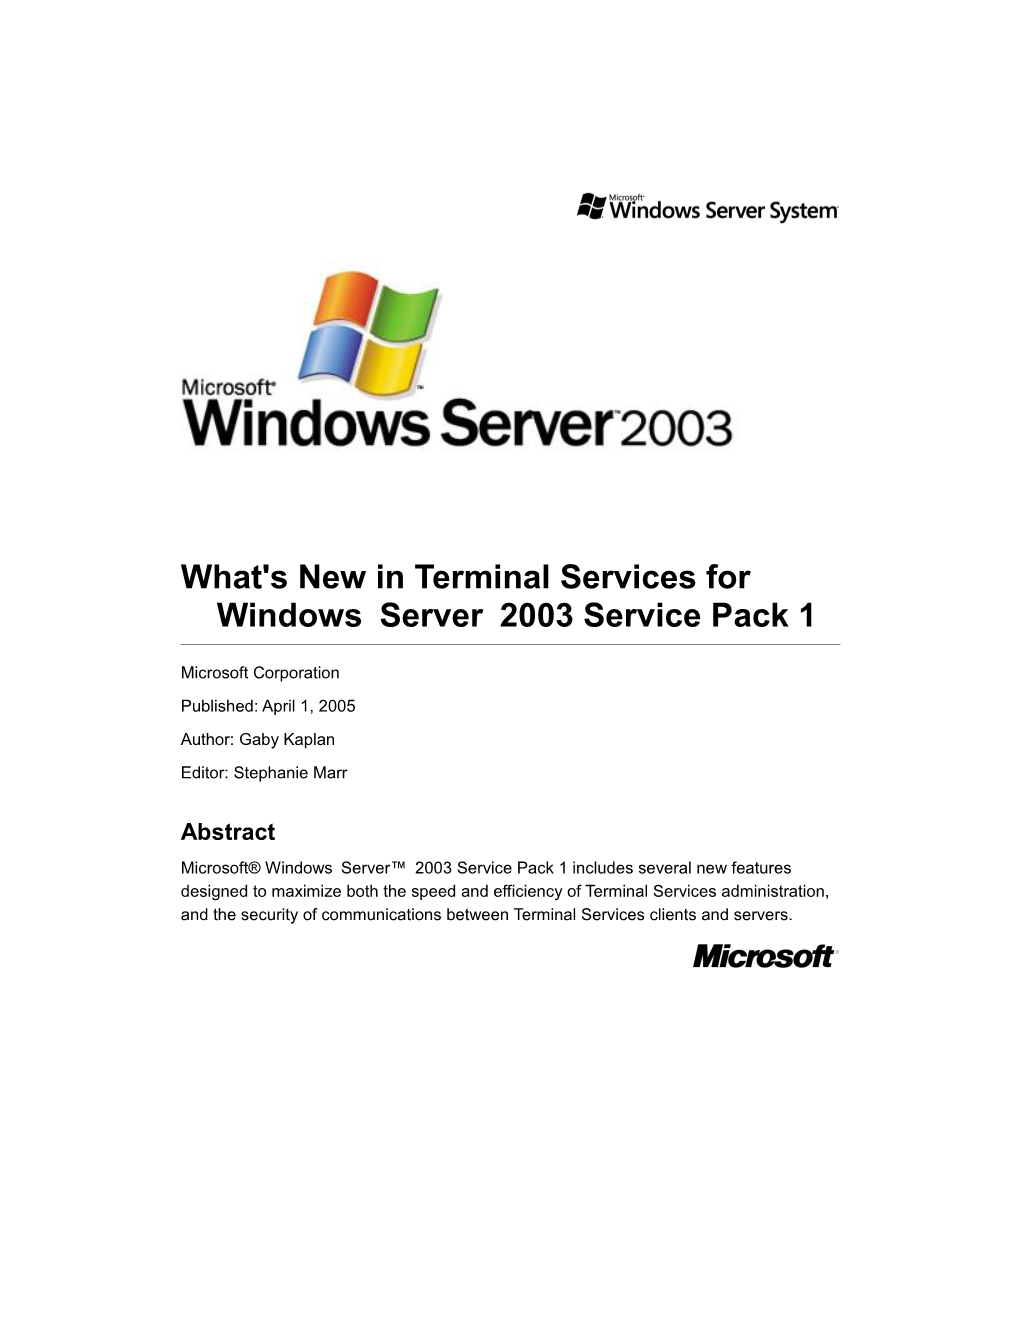 What's New in Terminal Services for Windowsserver2003 Service Pack 1